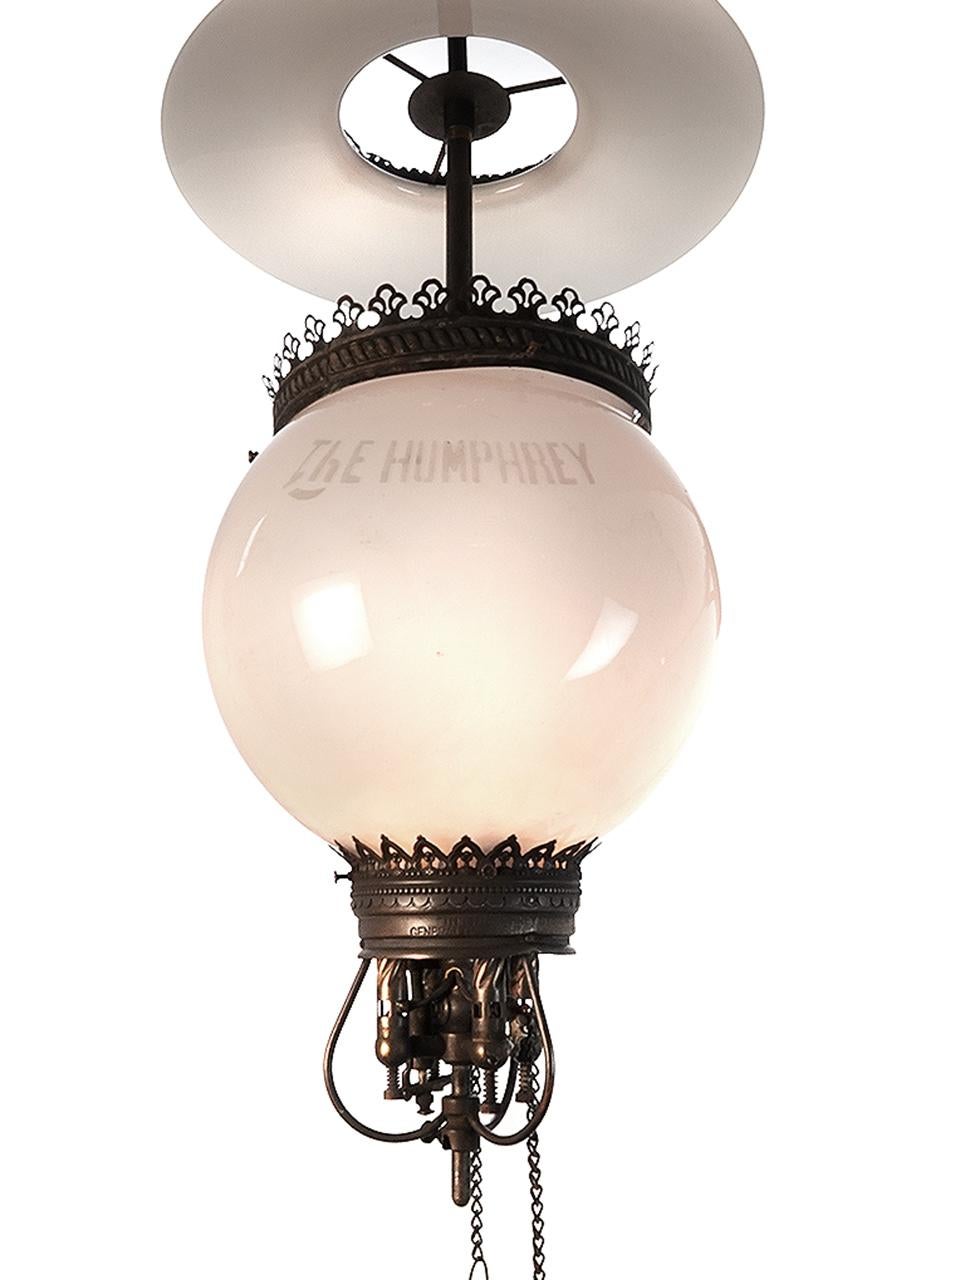 20th Century Signed Humphrey Gas Lamp, Electrified